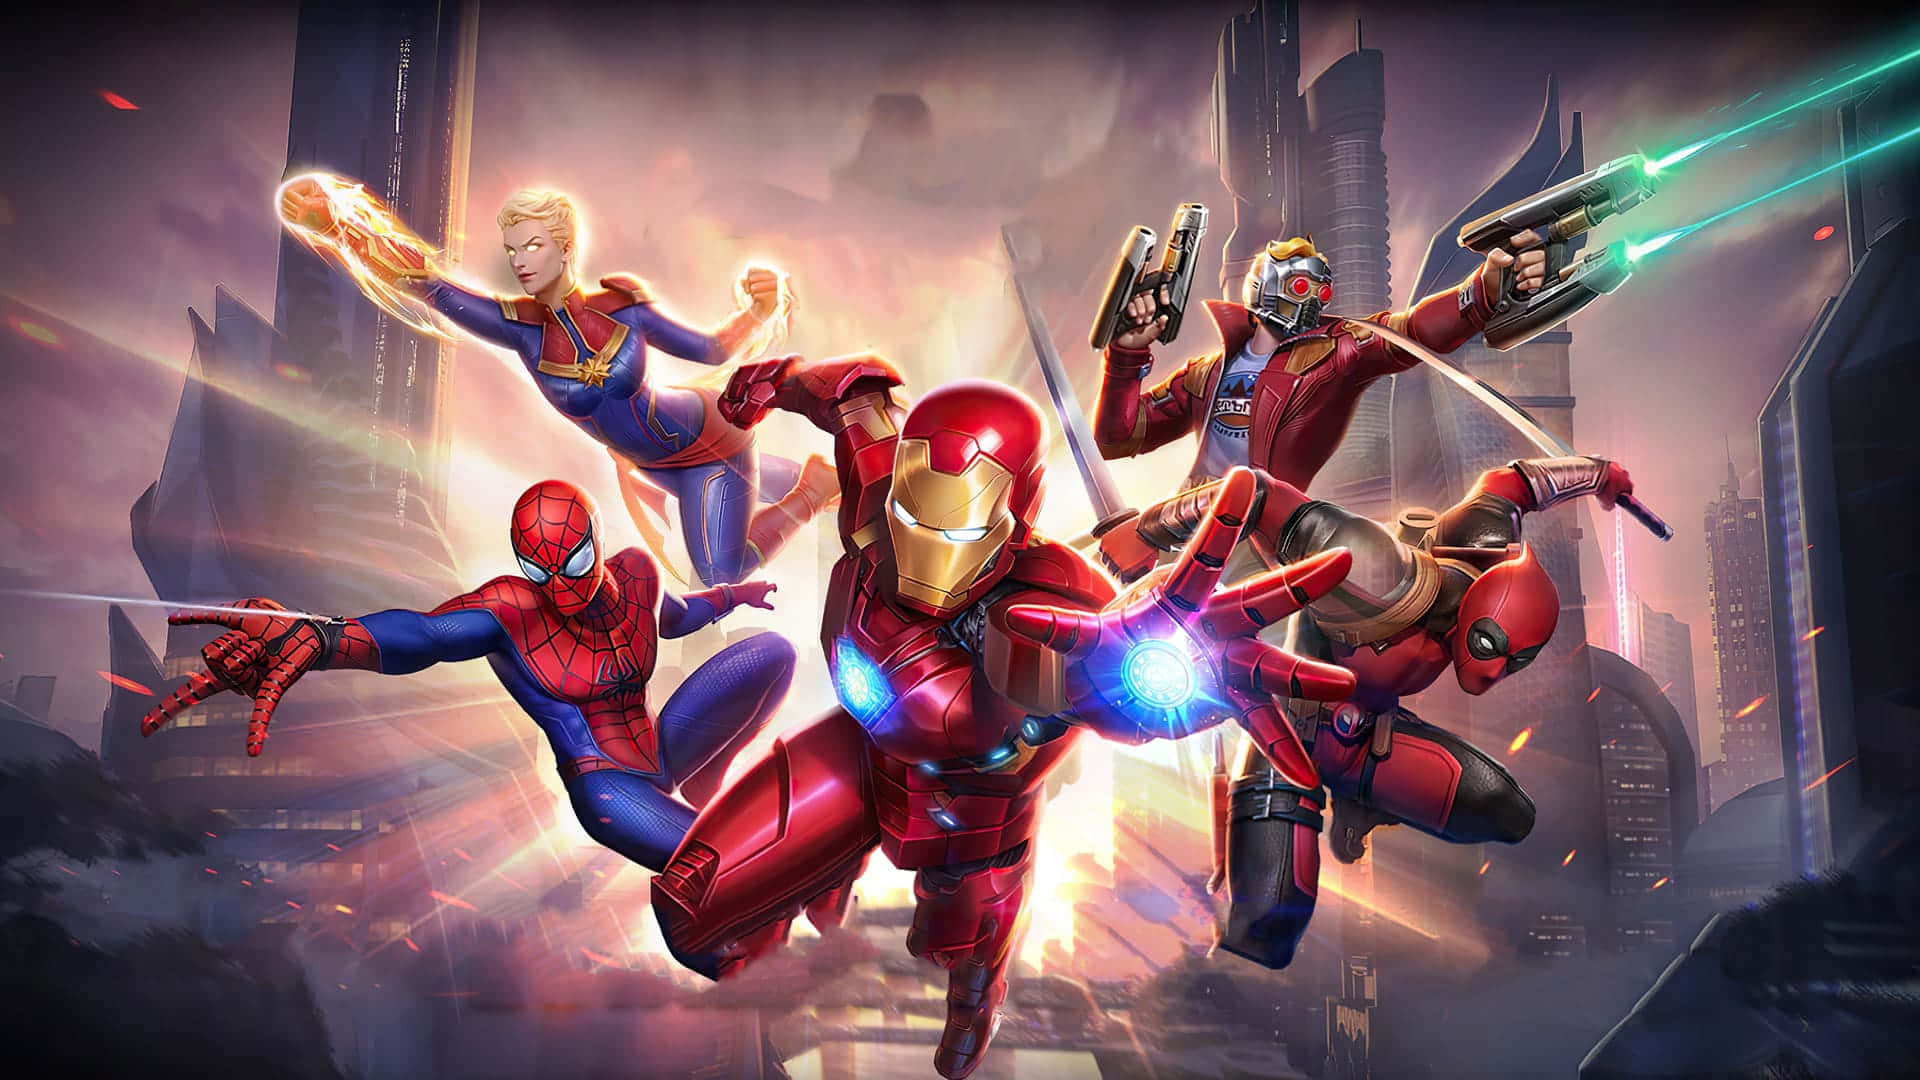 Two Marvel Superheroes, Spider-Man and Iron Man Wallpaper